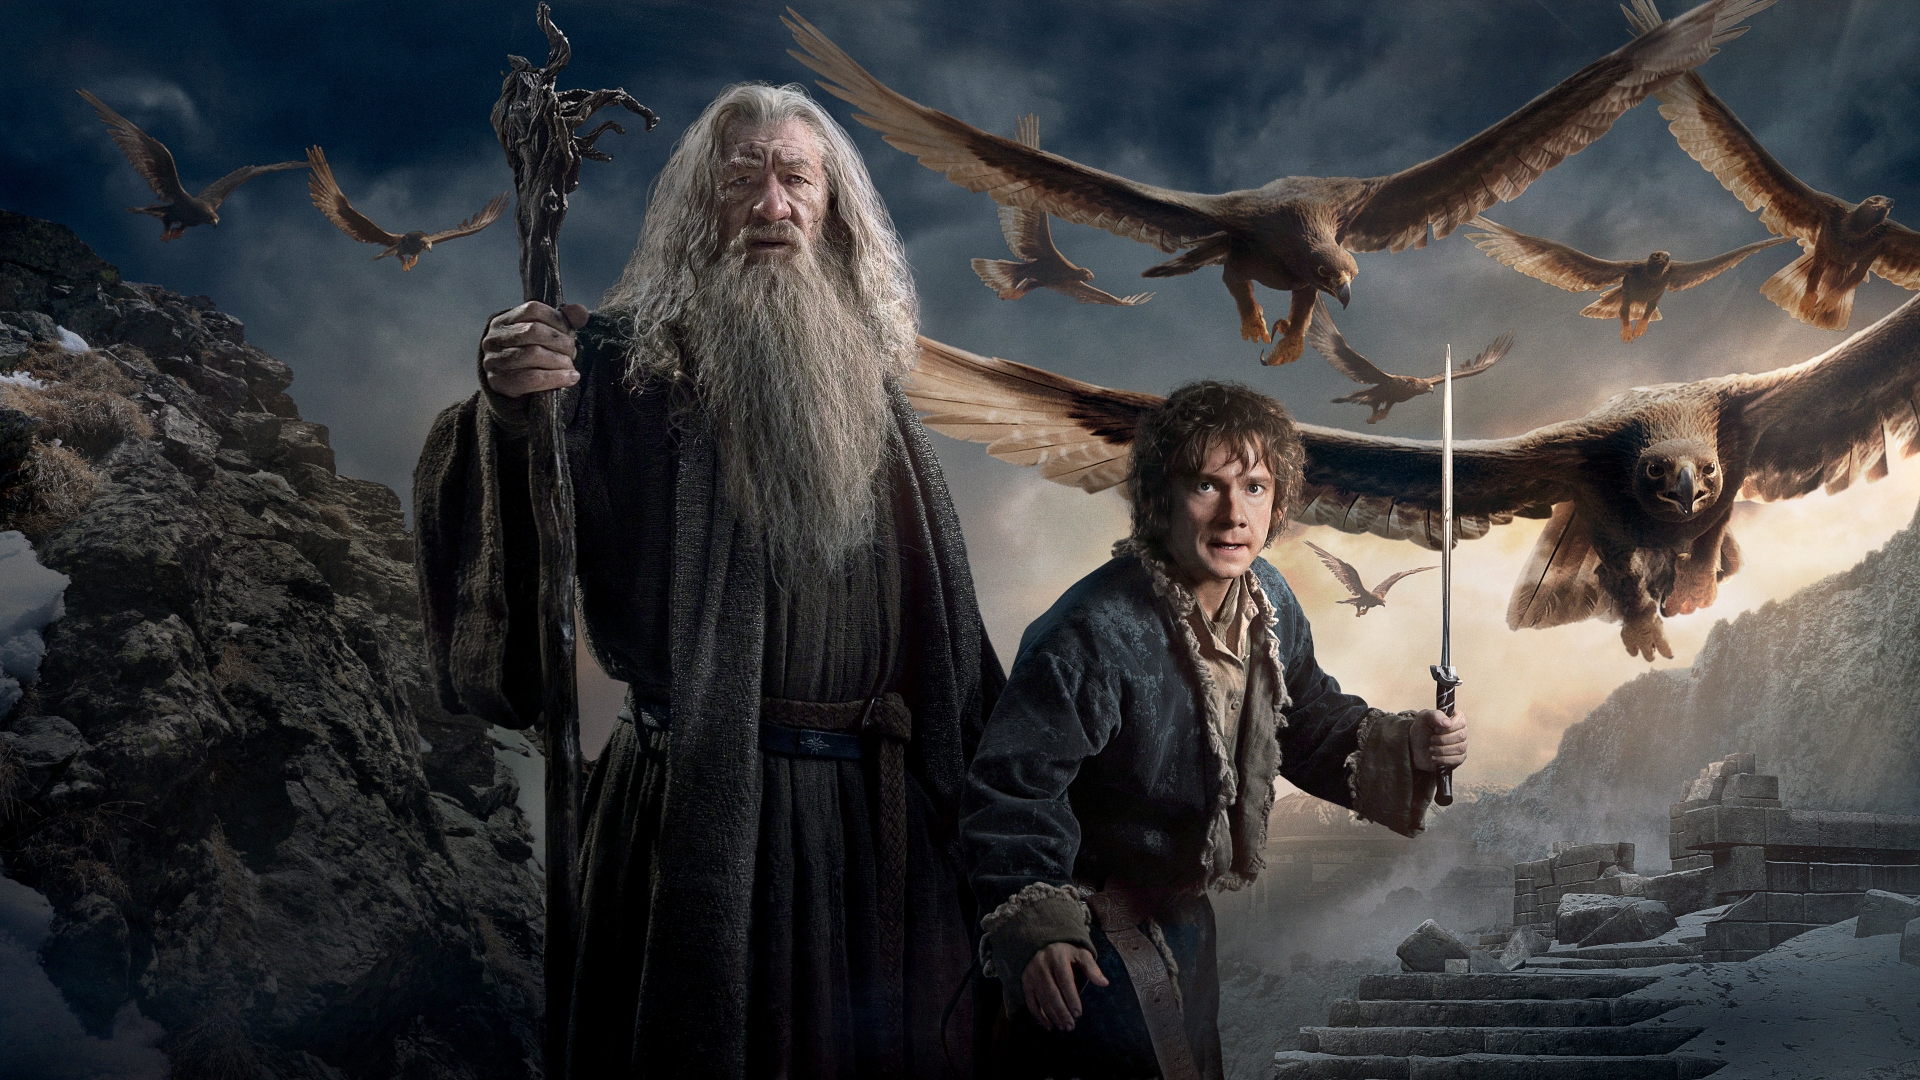 The Hobbit The Battle Of The Five Armies for 1920 x 1080 HDTV 1080p resolution